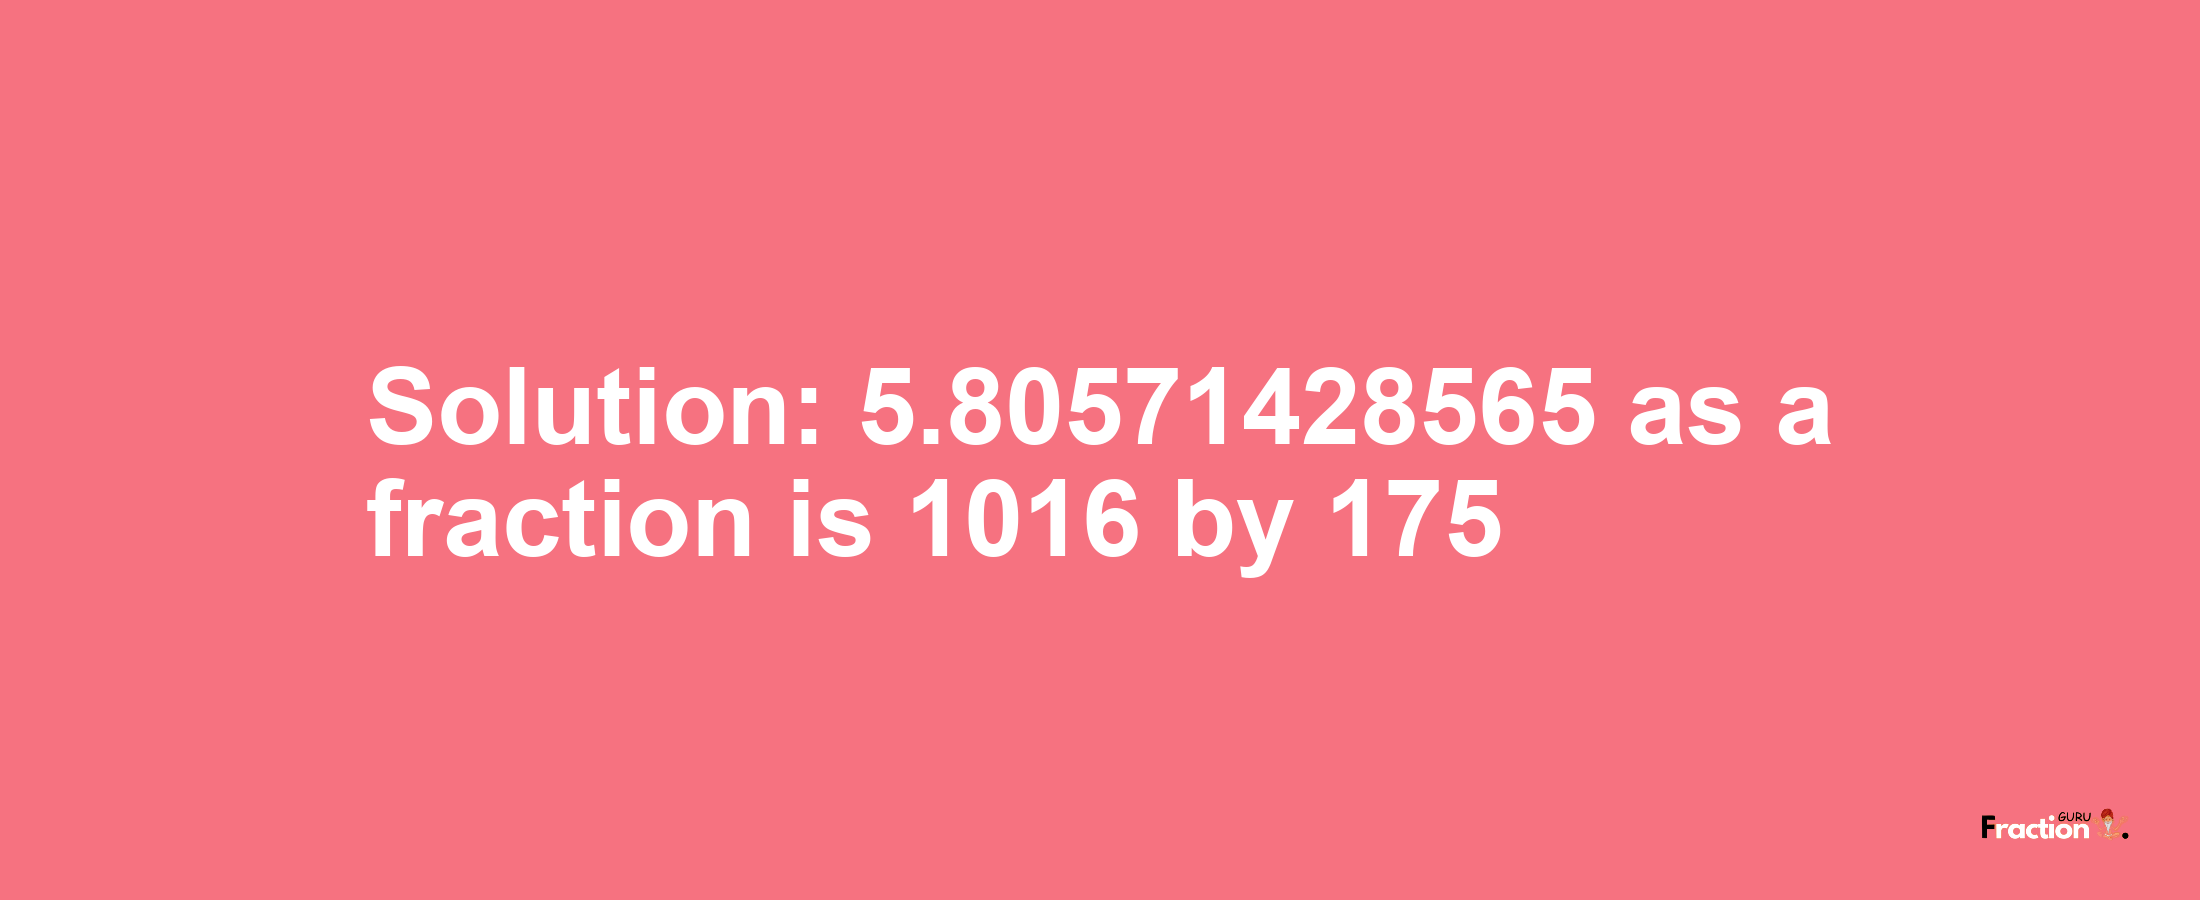 Solution:5.80571428565 as a fraction is 1016/175